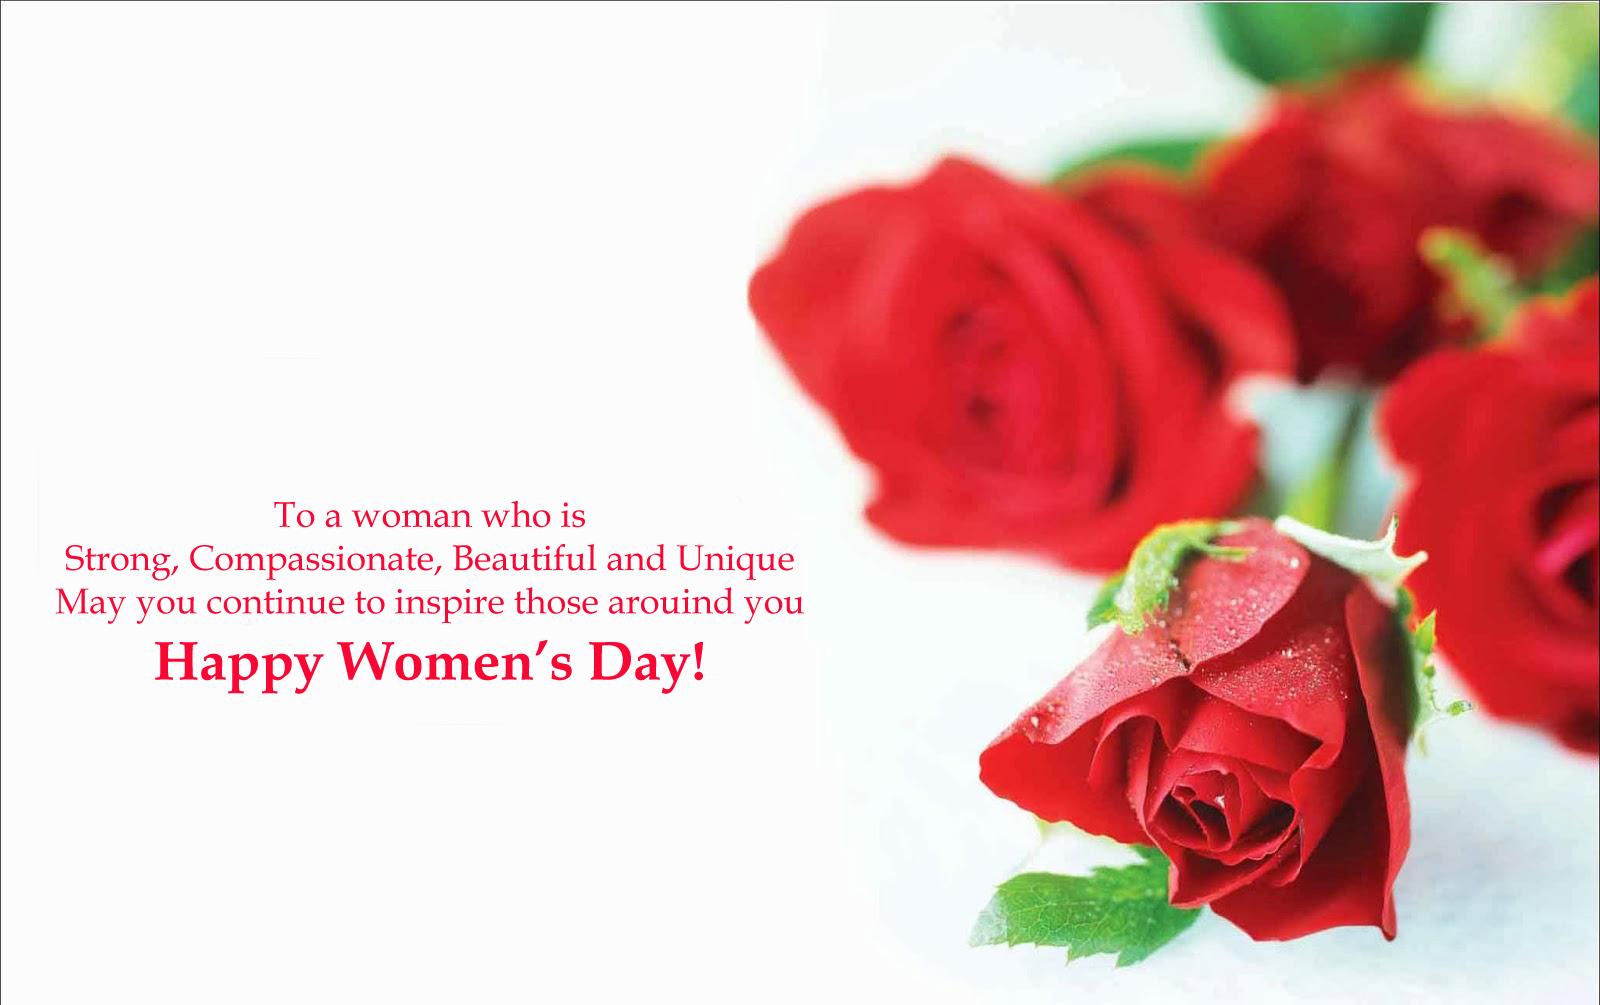 Happy Women's Day 2019 quotes, messages, wishes, Poems in English